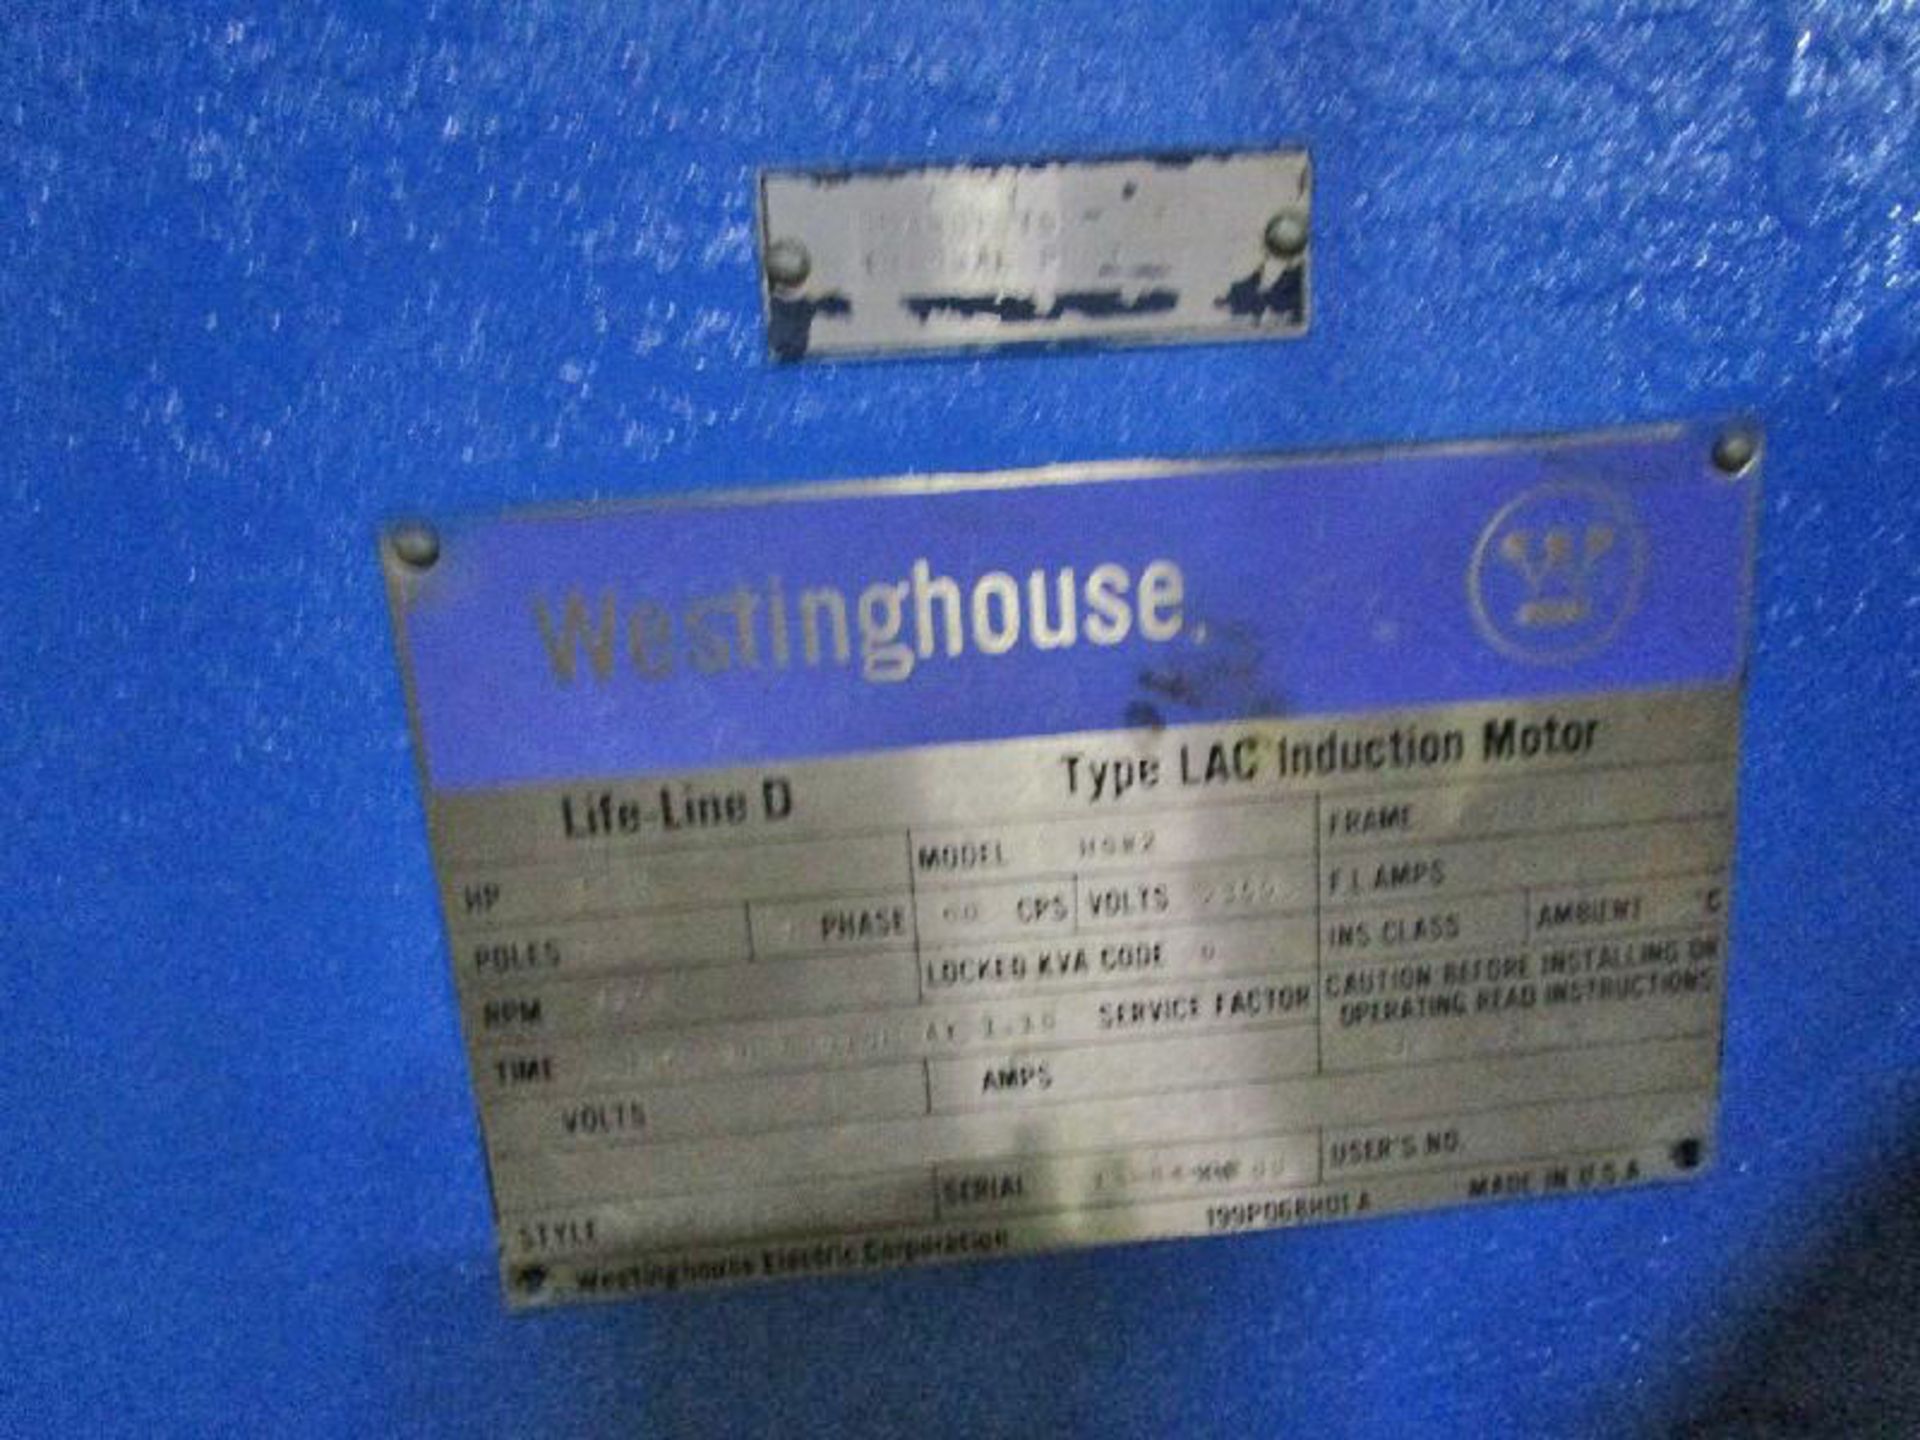 Westinghouse Model HSW2 1000 HP Electric Induction Motor - Image 2 of 3